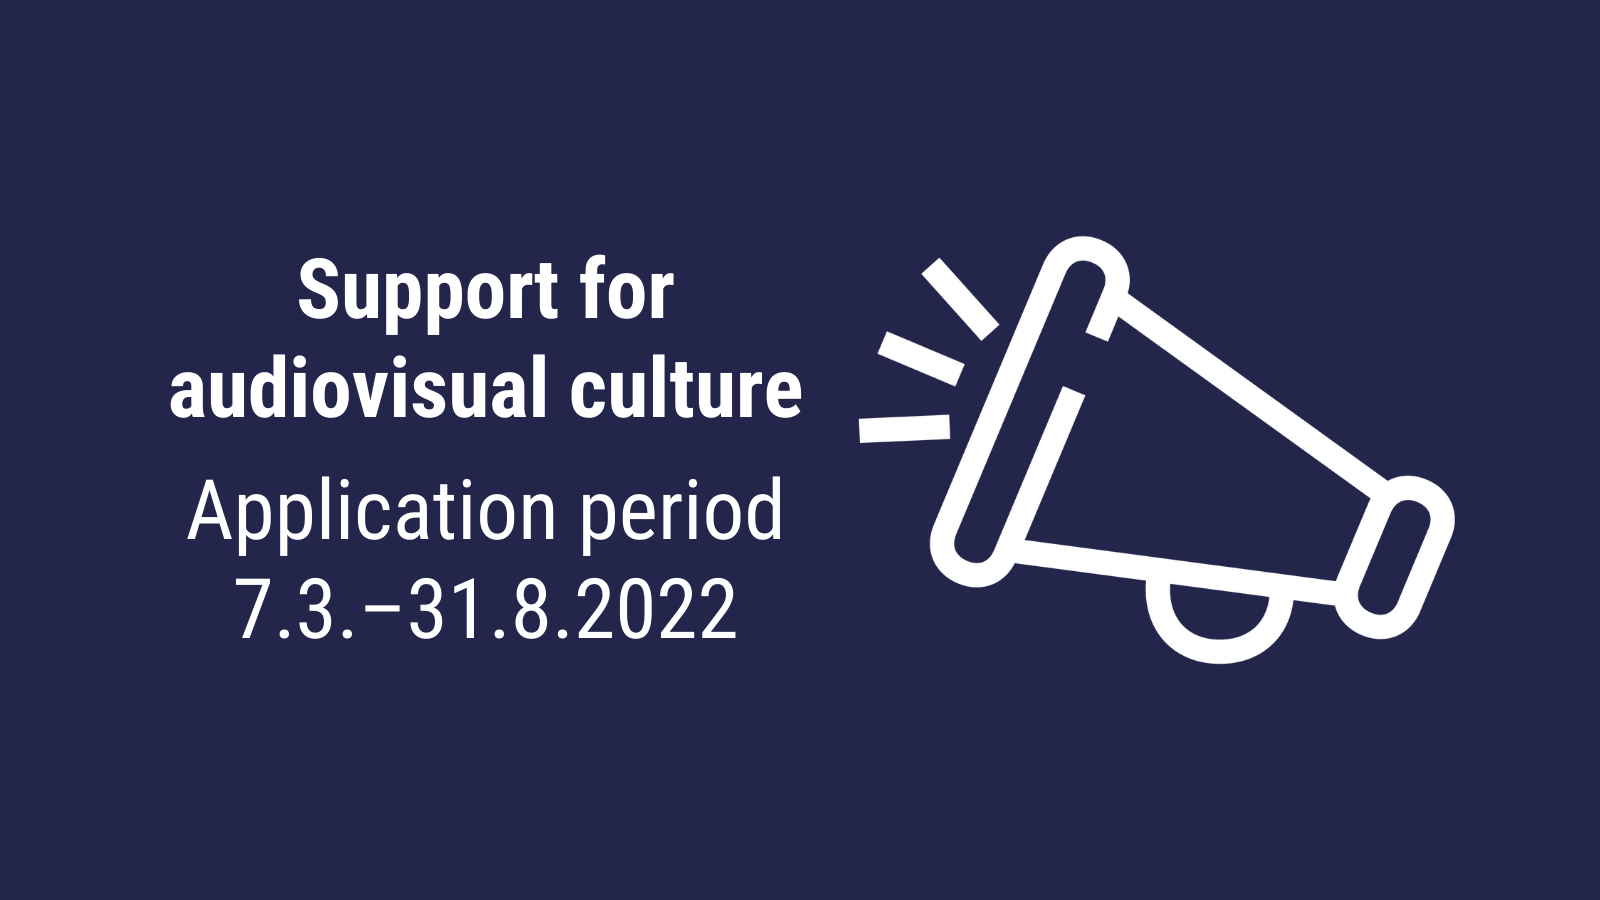 Support for audiovisual culture, application period 7.3.-31.8.2022